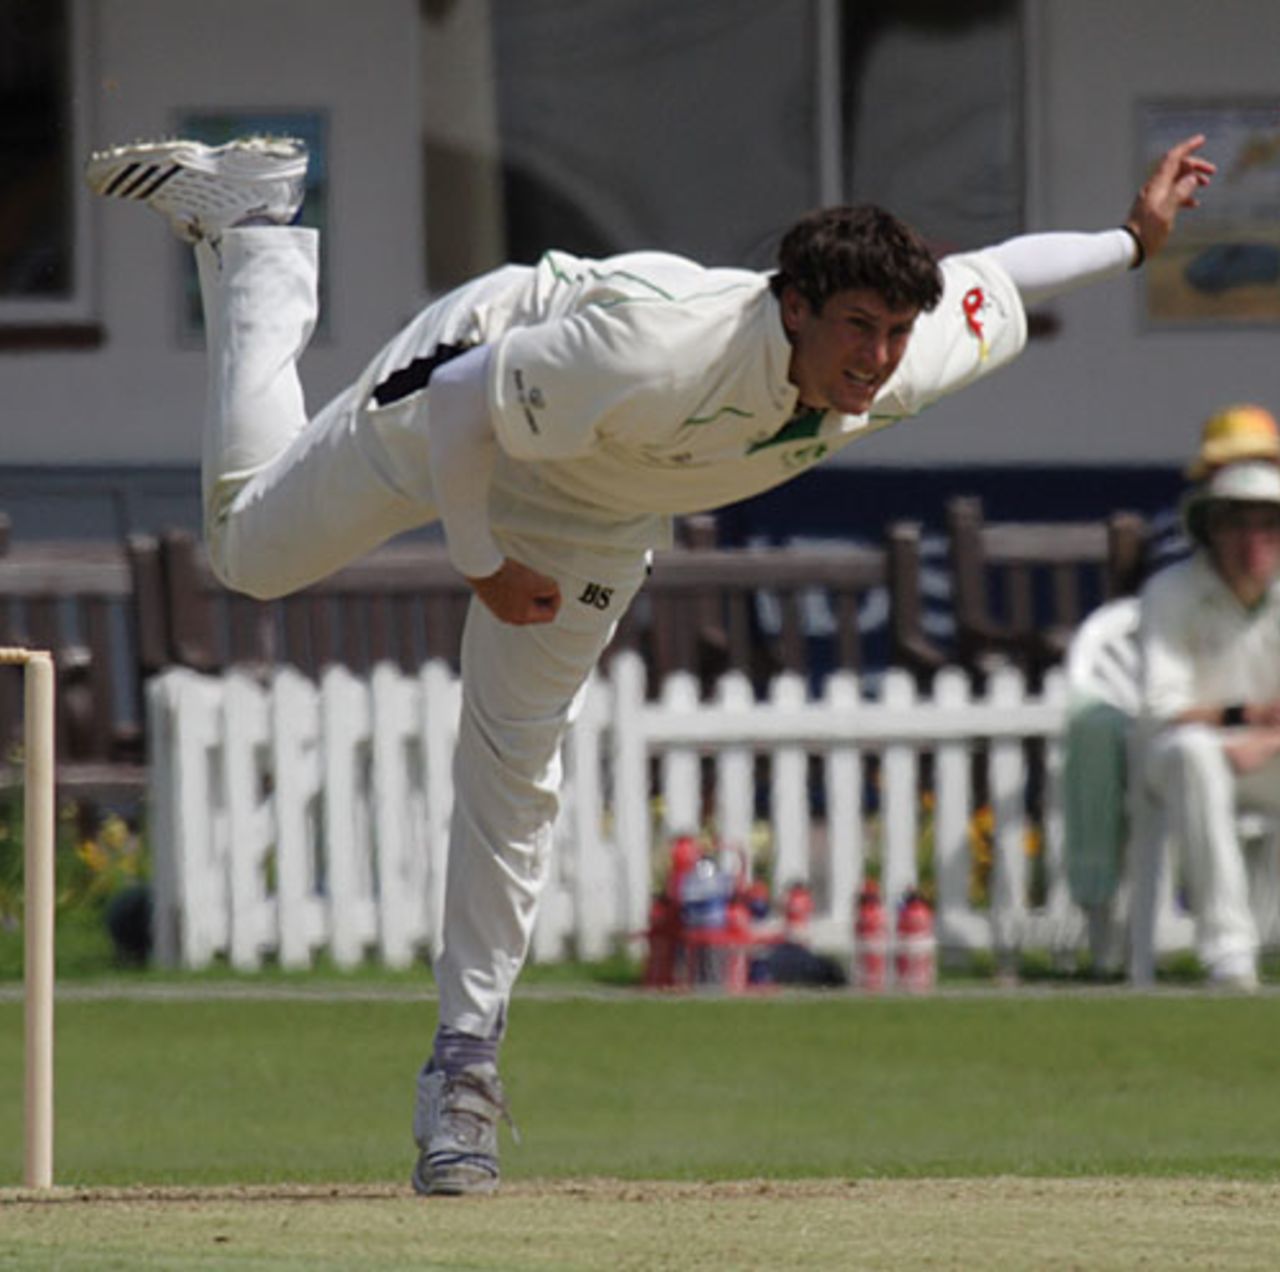 Thinus Fourie in action, Canada v Ireland, Intercontinental Cup final, Grace Road, May 22, 2007